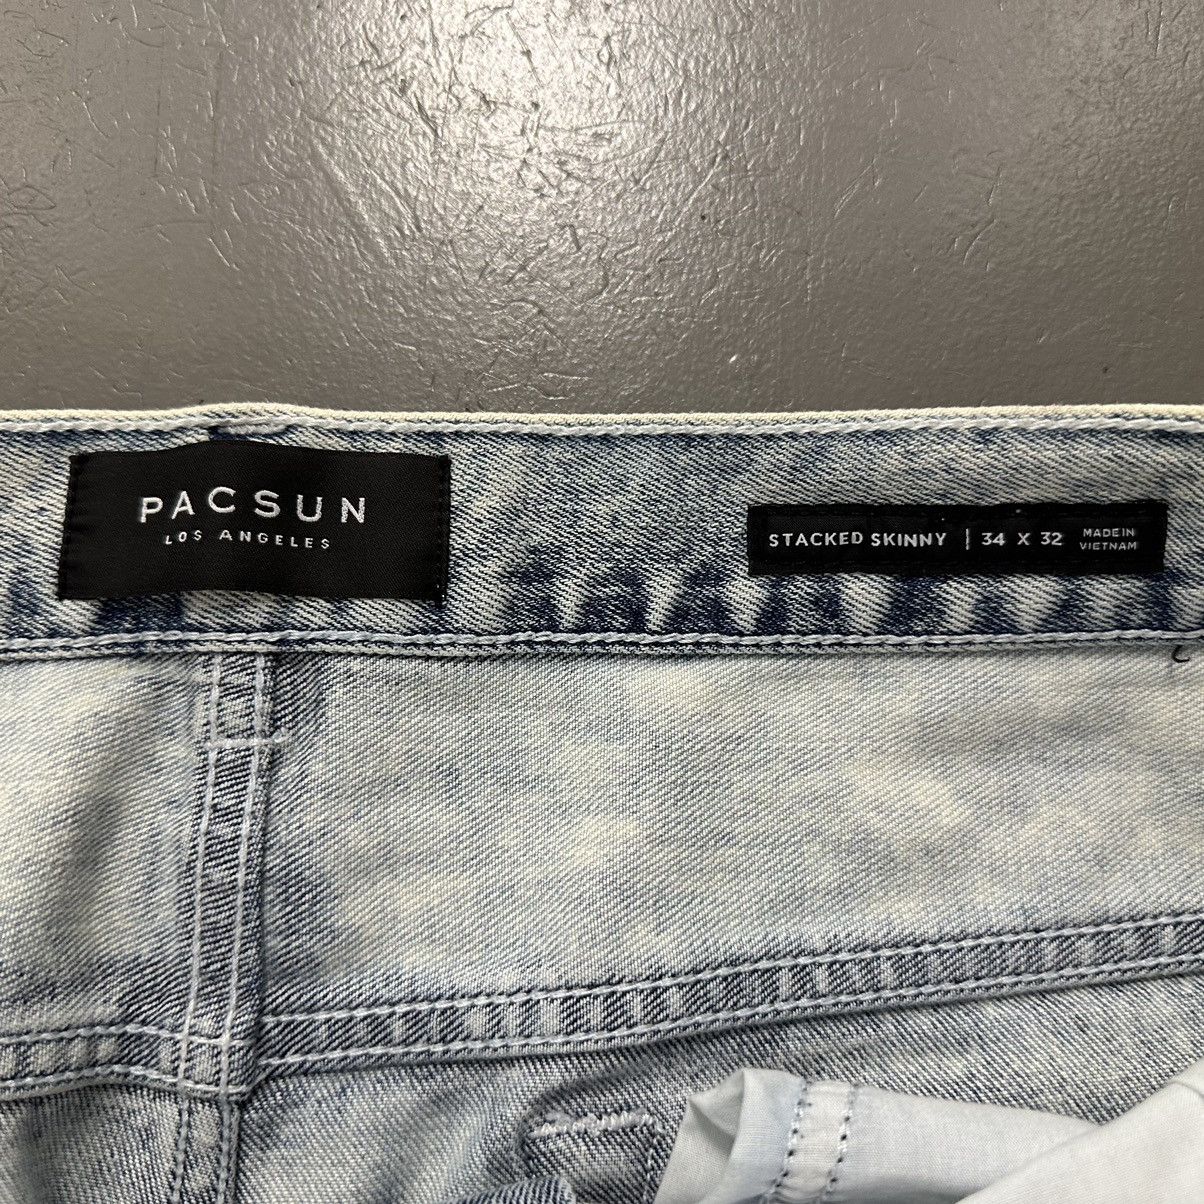 Pacsun Stacked Skinny Denim Jeans 34x32 - 7